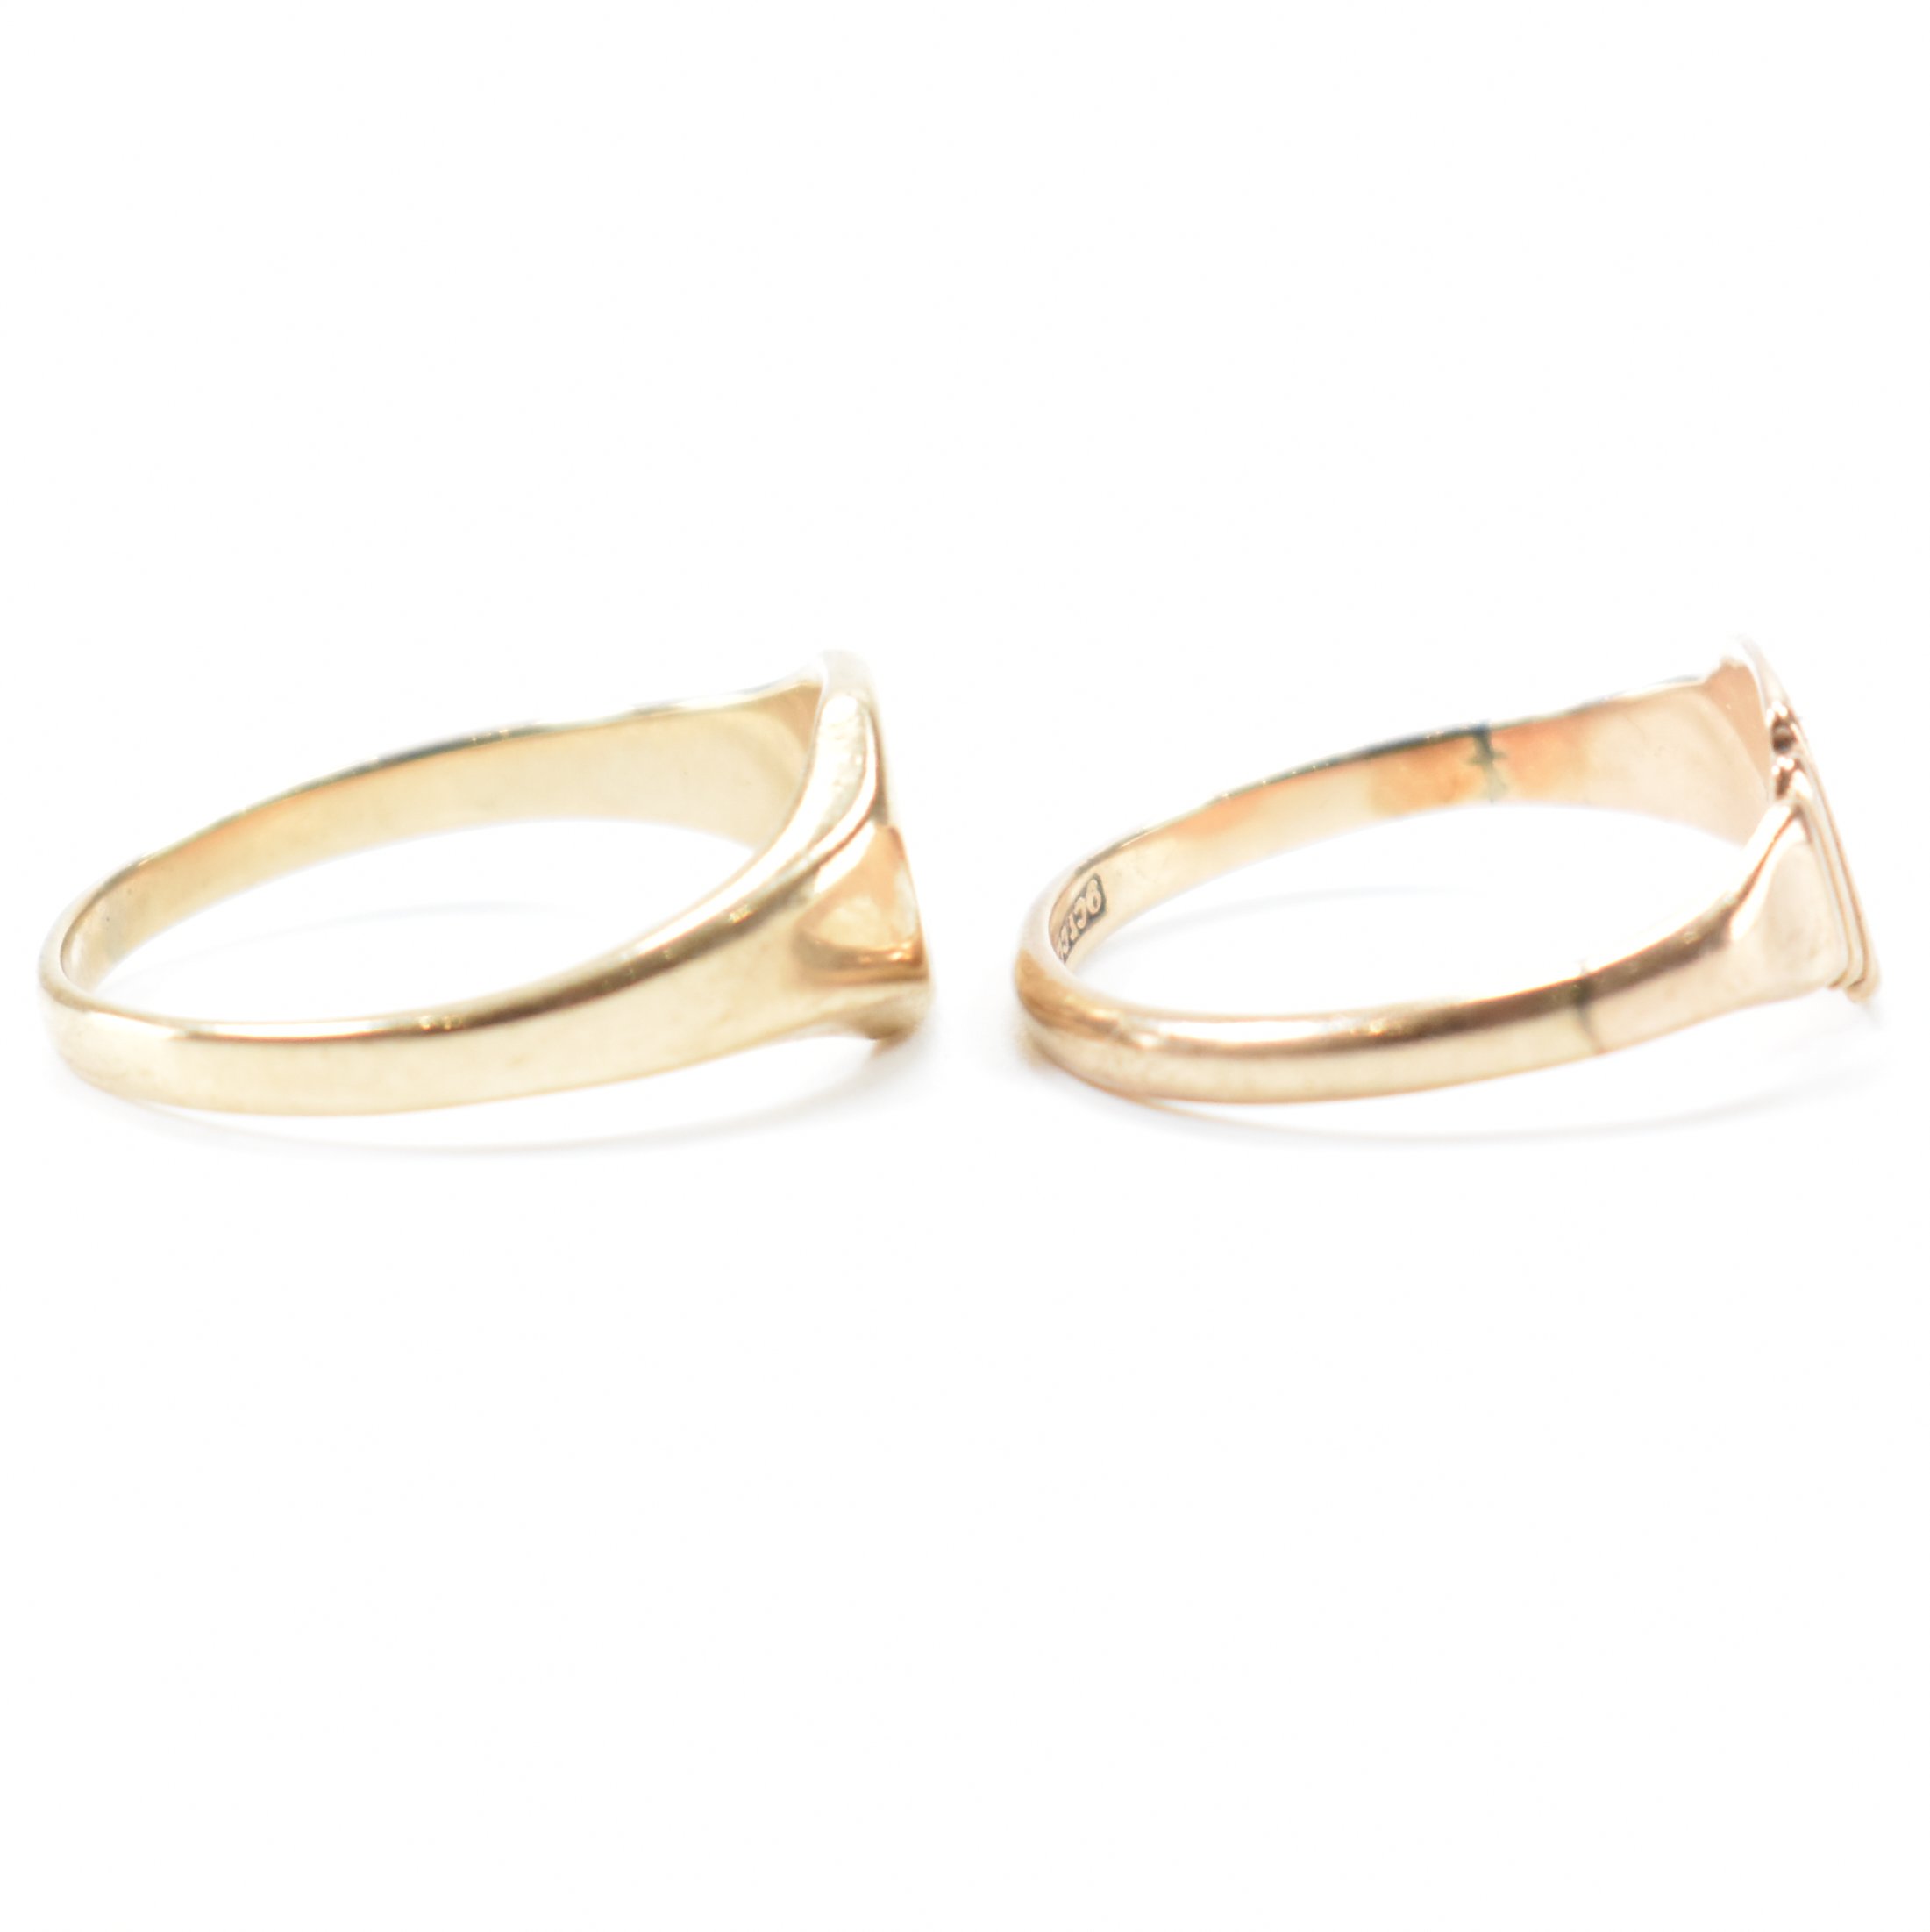 TWO 9CT GOLD SIGNET RINGS - Image 4 of 7